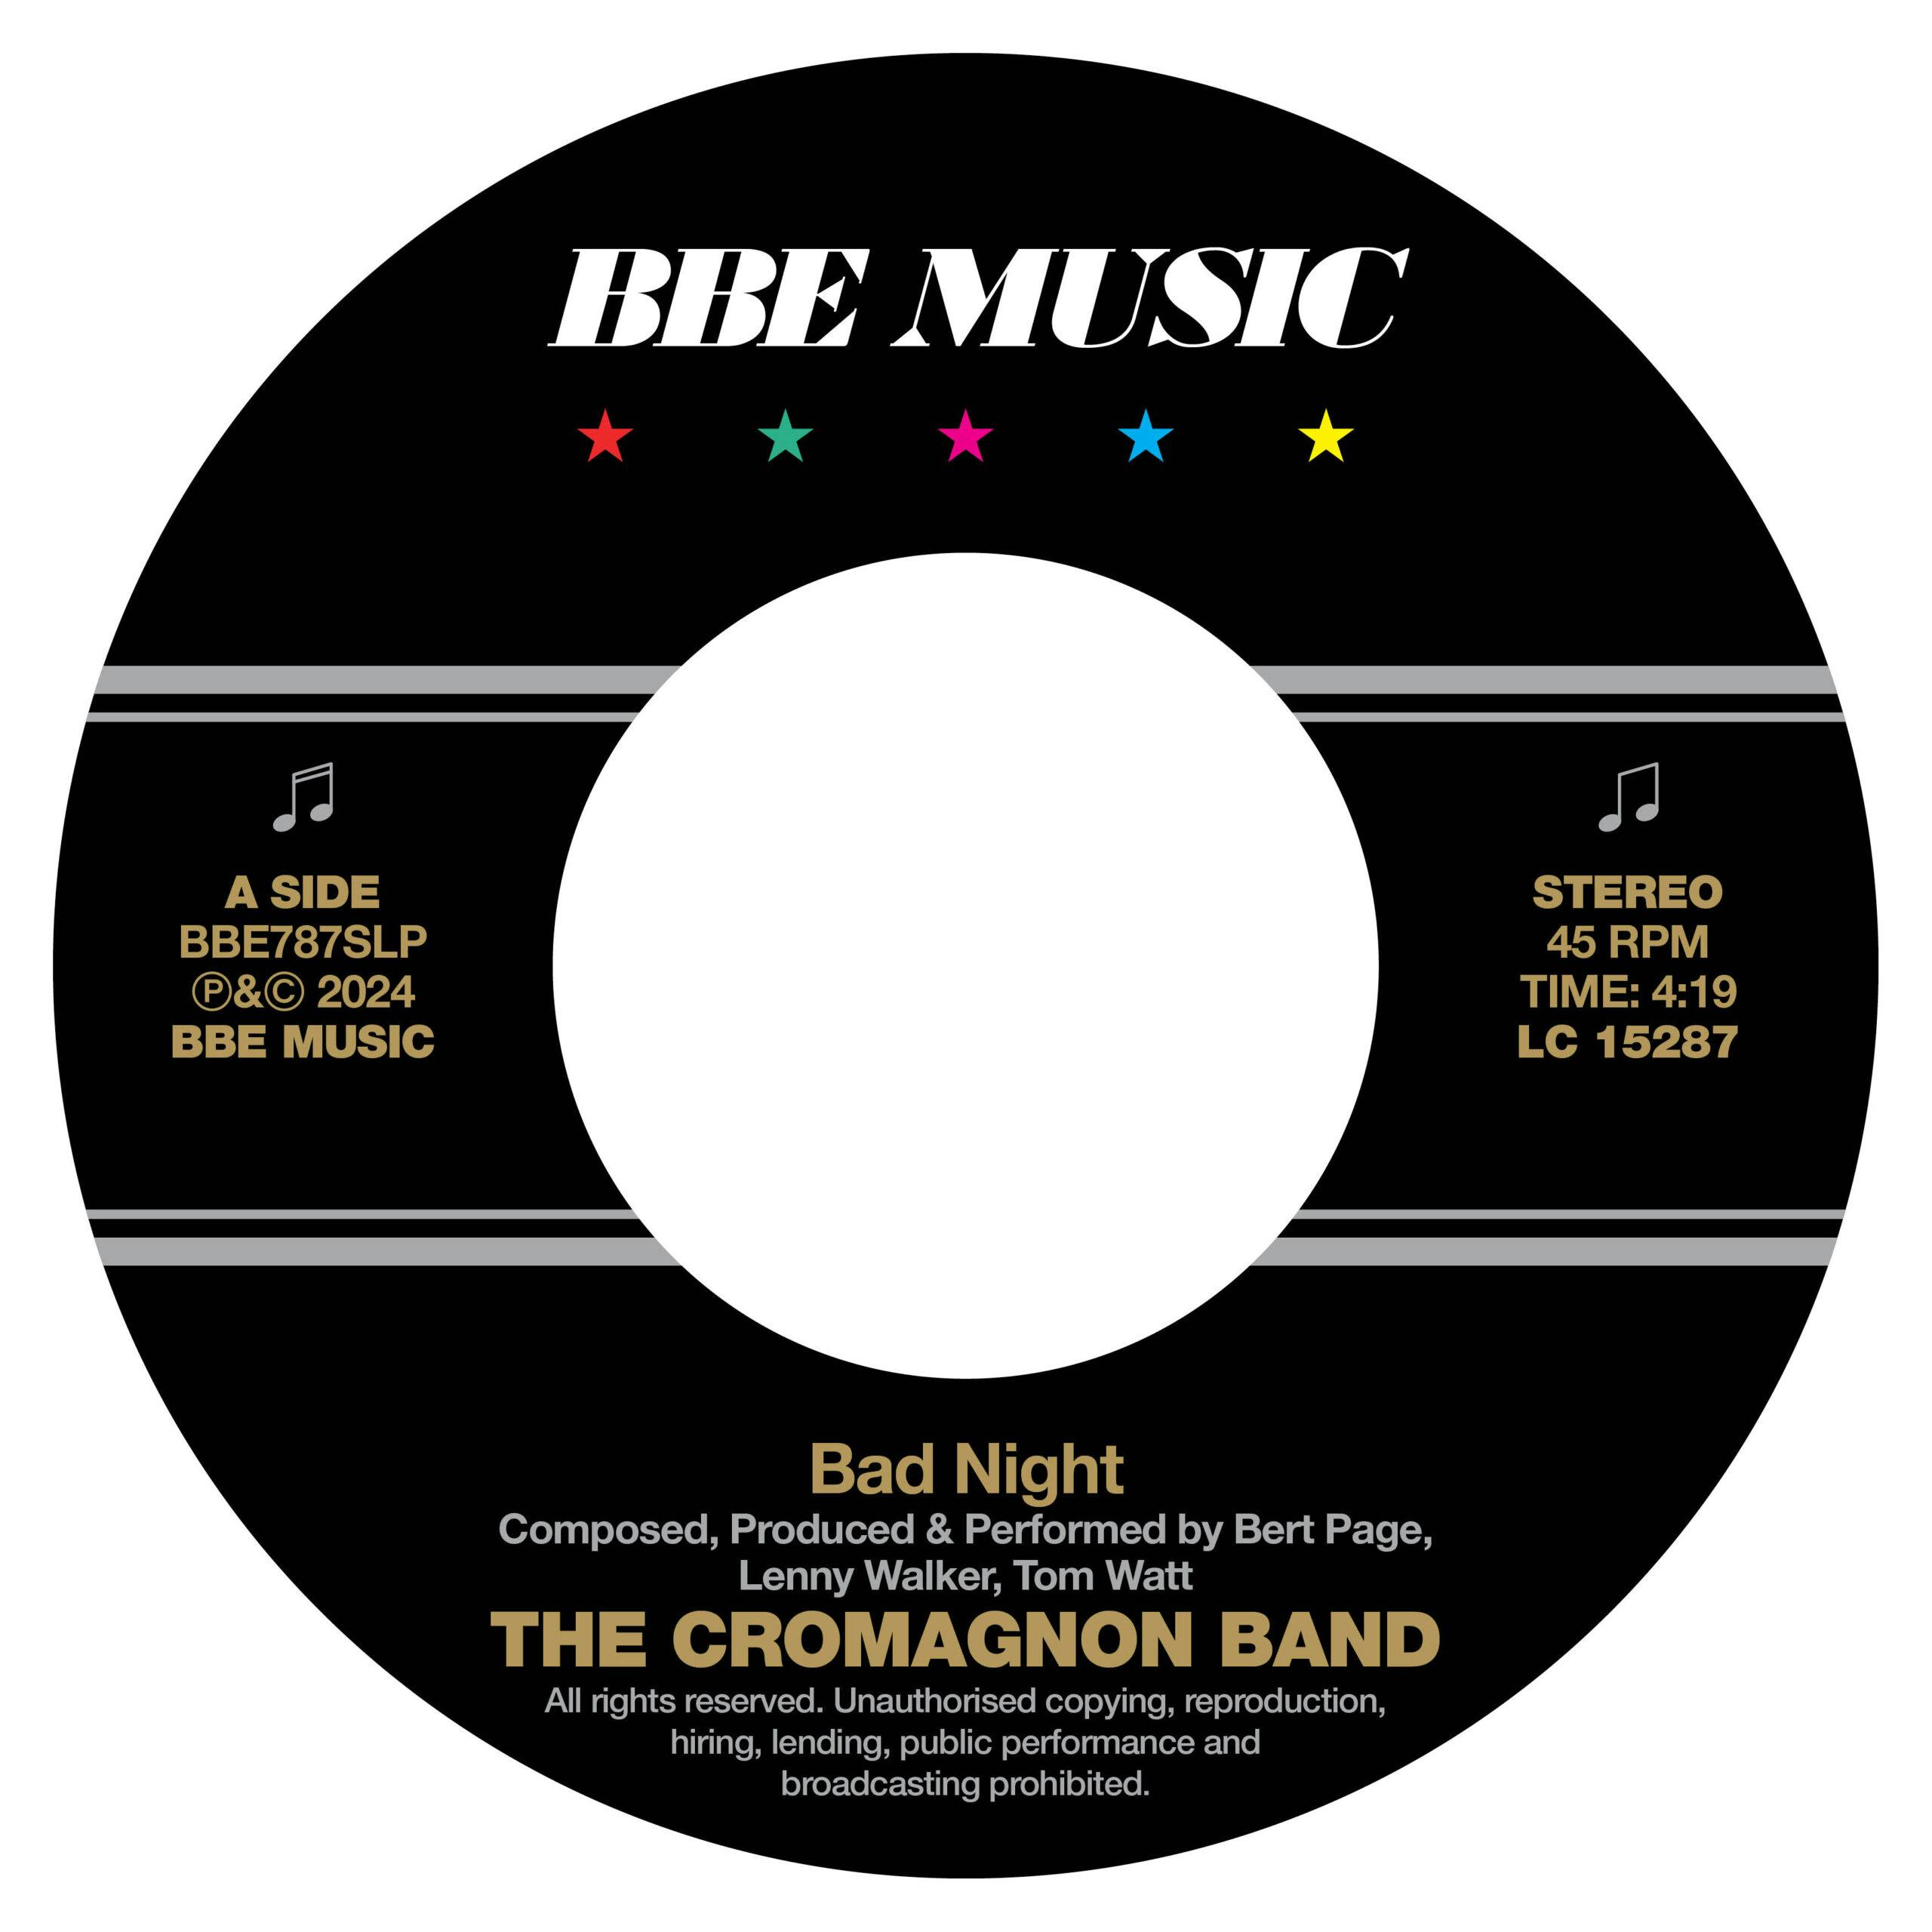 Releasing as a vinyl 45, Bad Night is the lead offering from The Cromagnon Band's new album Mode. This is the band's second LP and the first of theirs to be released on BBE Music. Mode itself is an album of cinematic and psychedelic dark Funk tinged and tinted with Nordic psych/jazz, classical, boom-bap Hip-Hop breaks and riff heavy rock.